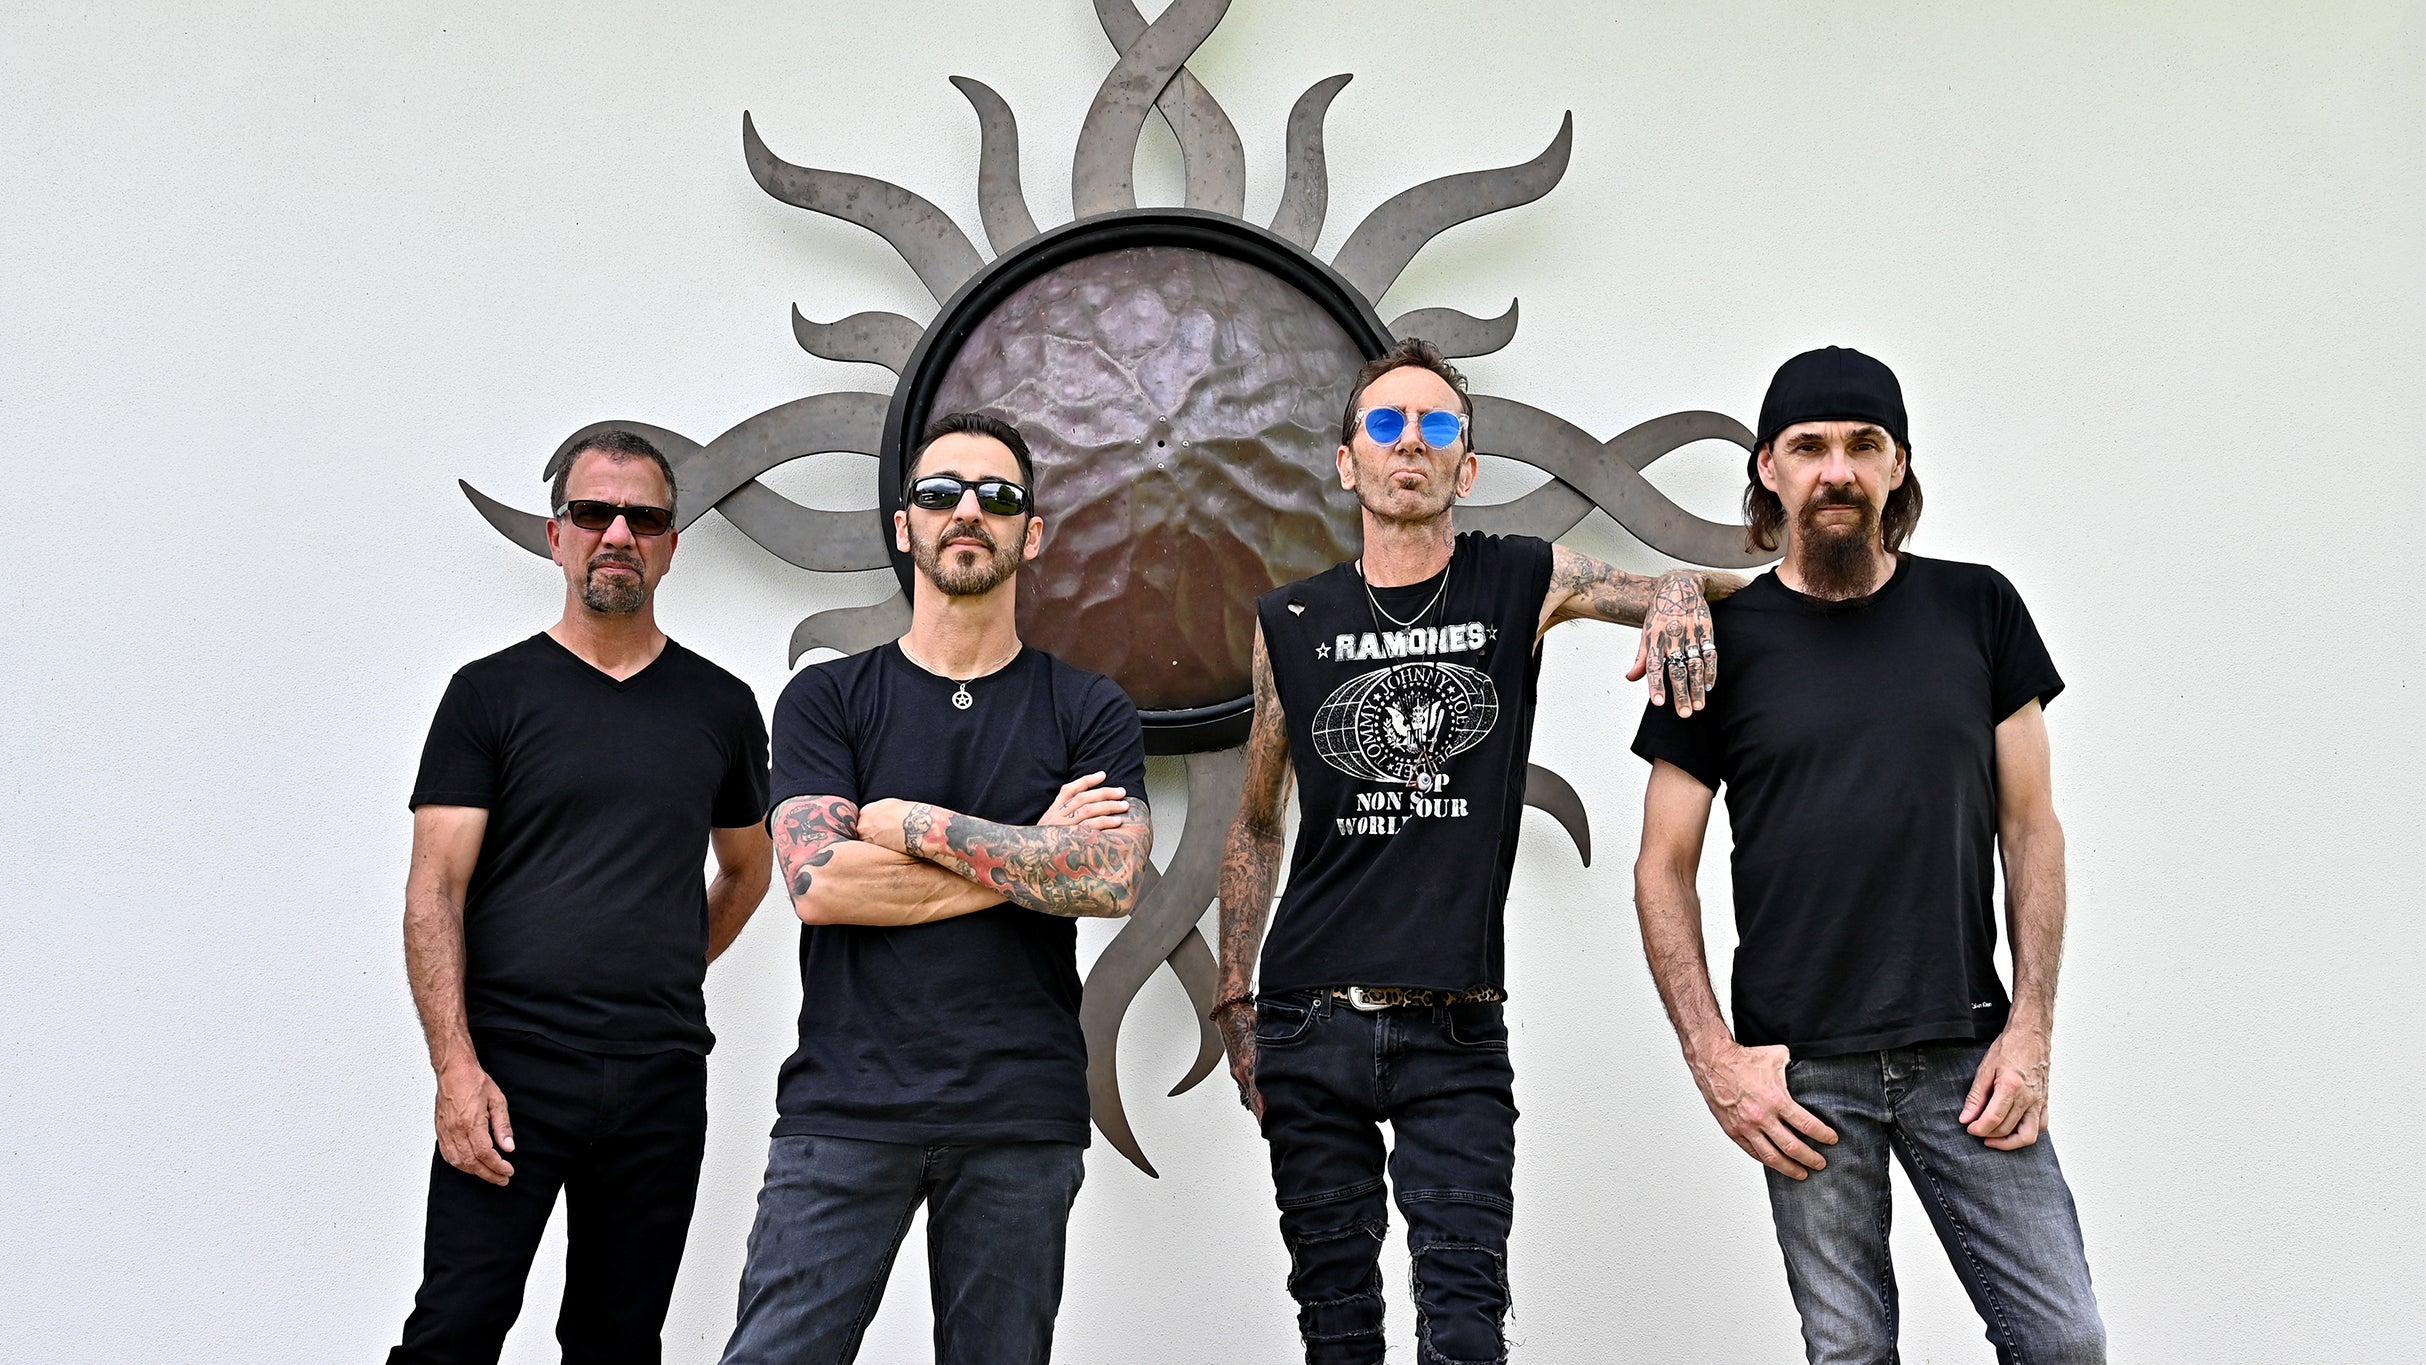 members only presale code for 107.9 KBPI Presents: Vibez Tour - An Intimate Evening with Godsmack tickets in Denver at Paramount Theatre